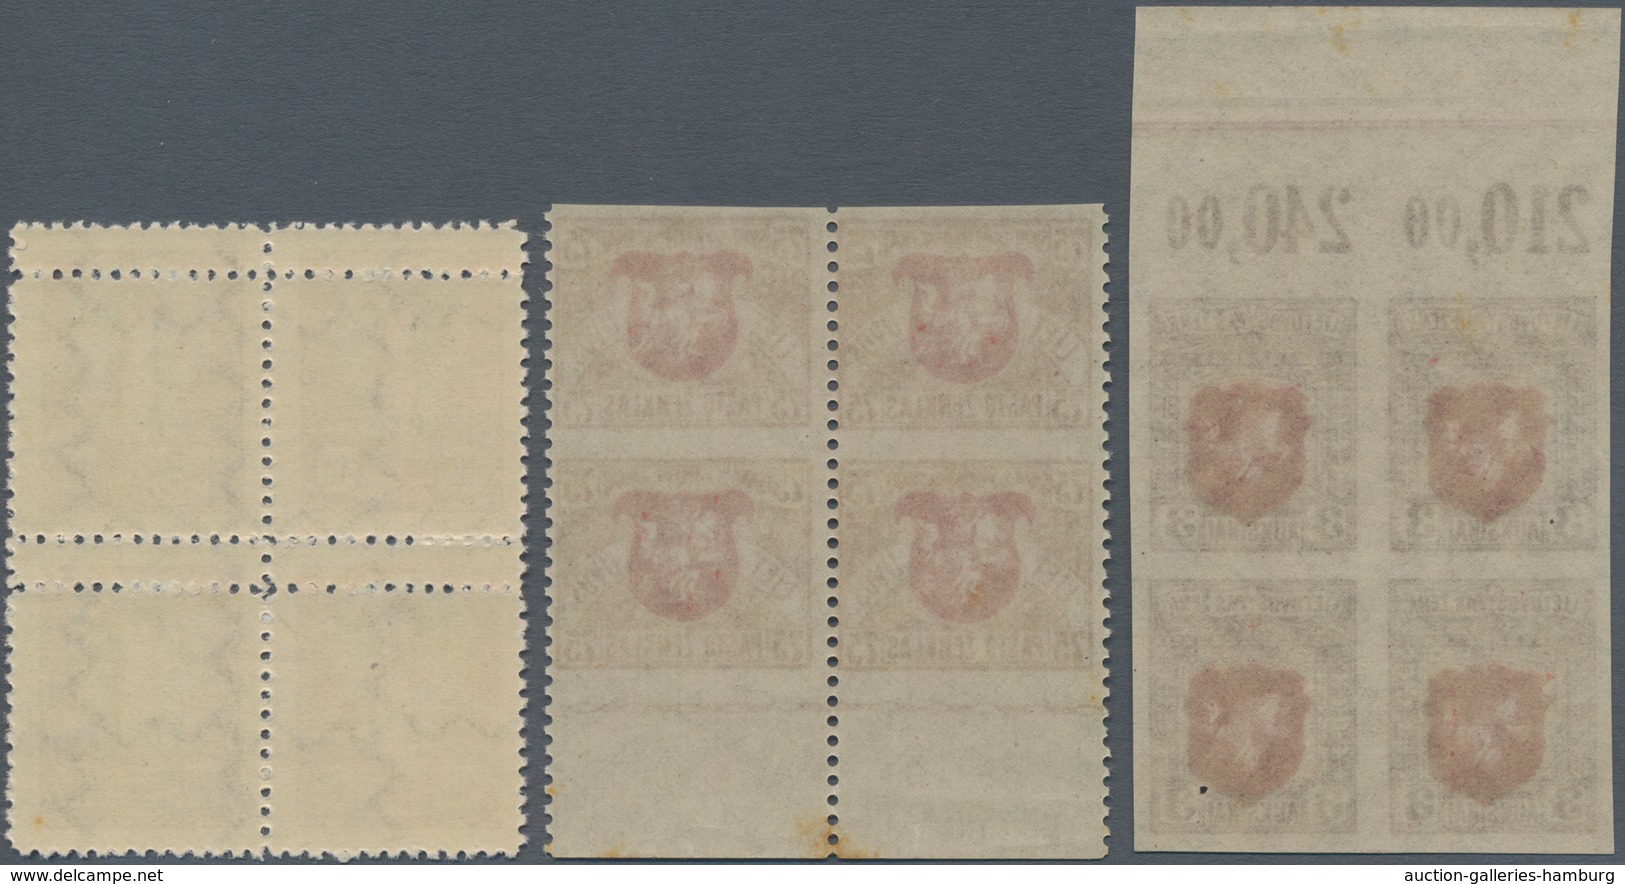 Litauen: 1919/1920, 3 A Coat Of Arms Imperforated Block Of Four From Upper Margin, 75 Sk Arms Block - Lituanie